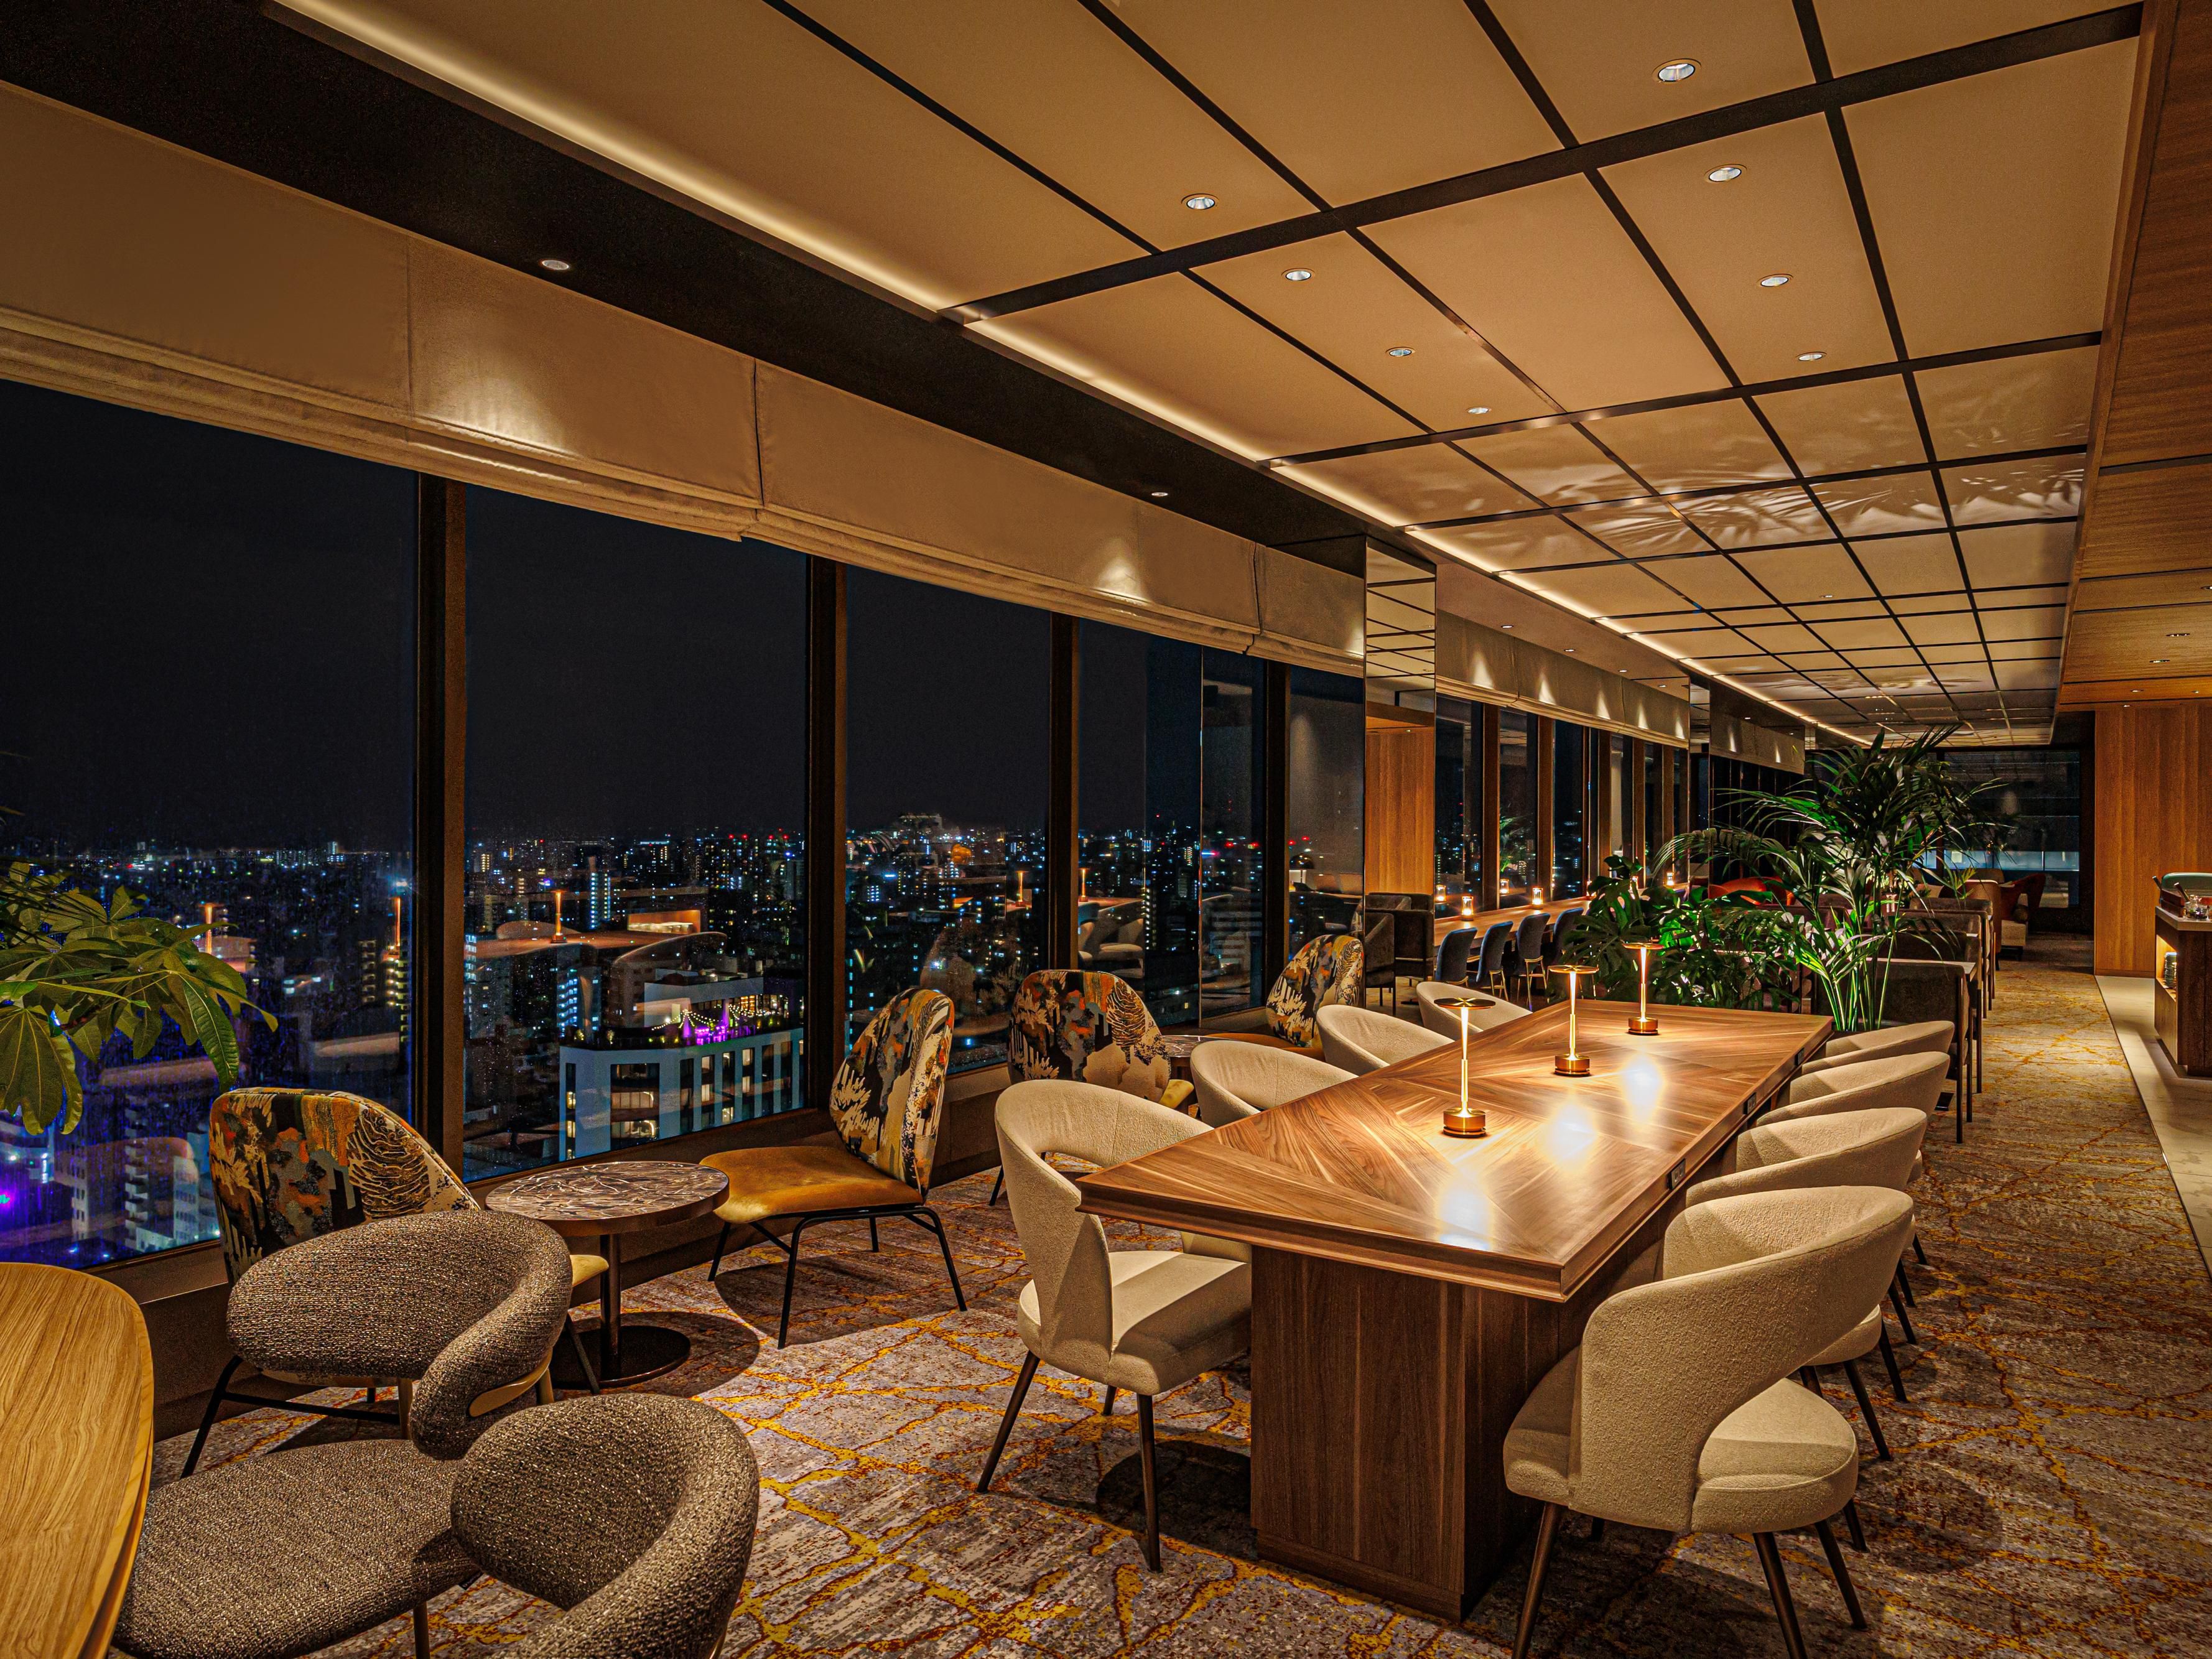 Stay in our Club room and animate your stay with our Club Lounge on the top floor at ANA Crowne Plaza Hiroshima. 
With the attractive view on the city to the inland sea of Setouchi, upscale your moment at the lounge with our breakfast, afternoon tea and cocktail services.